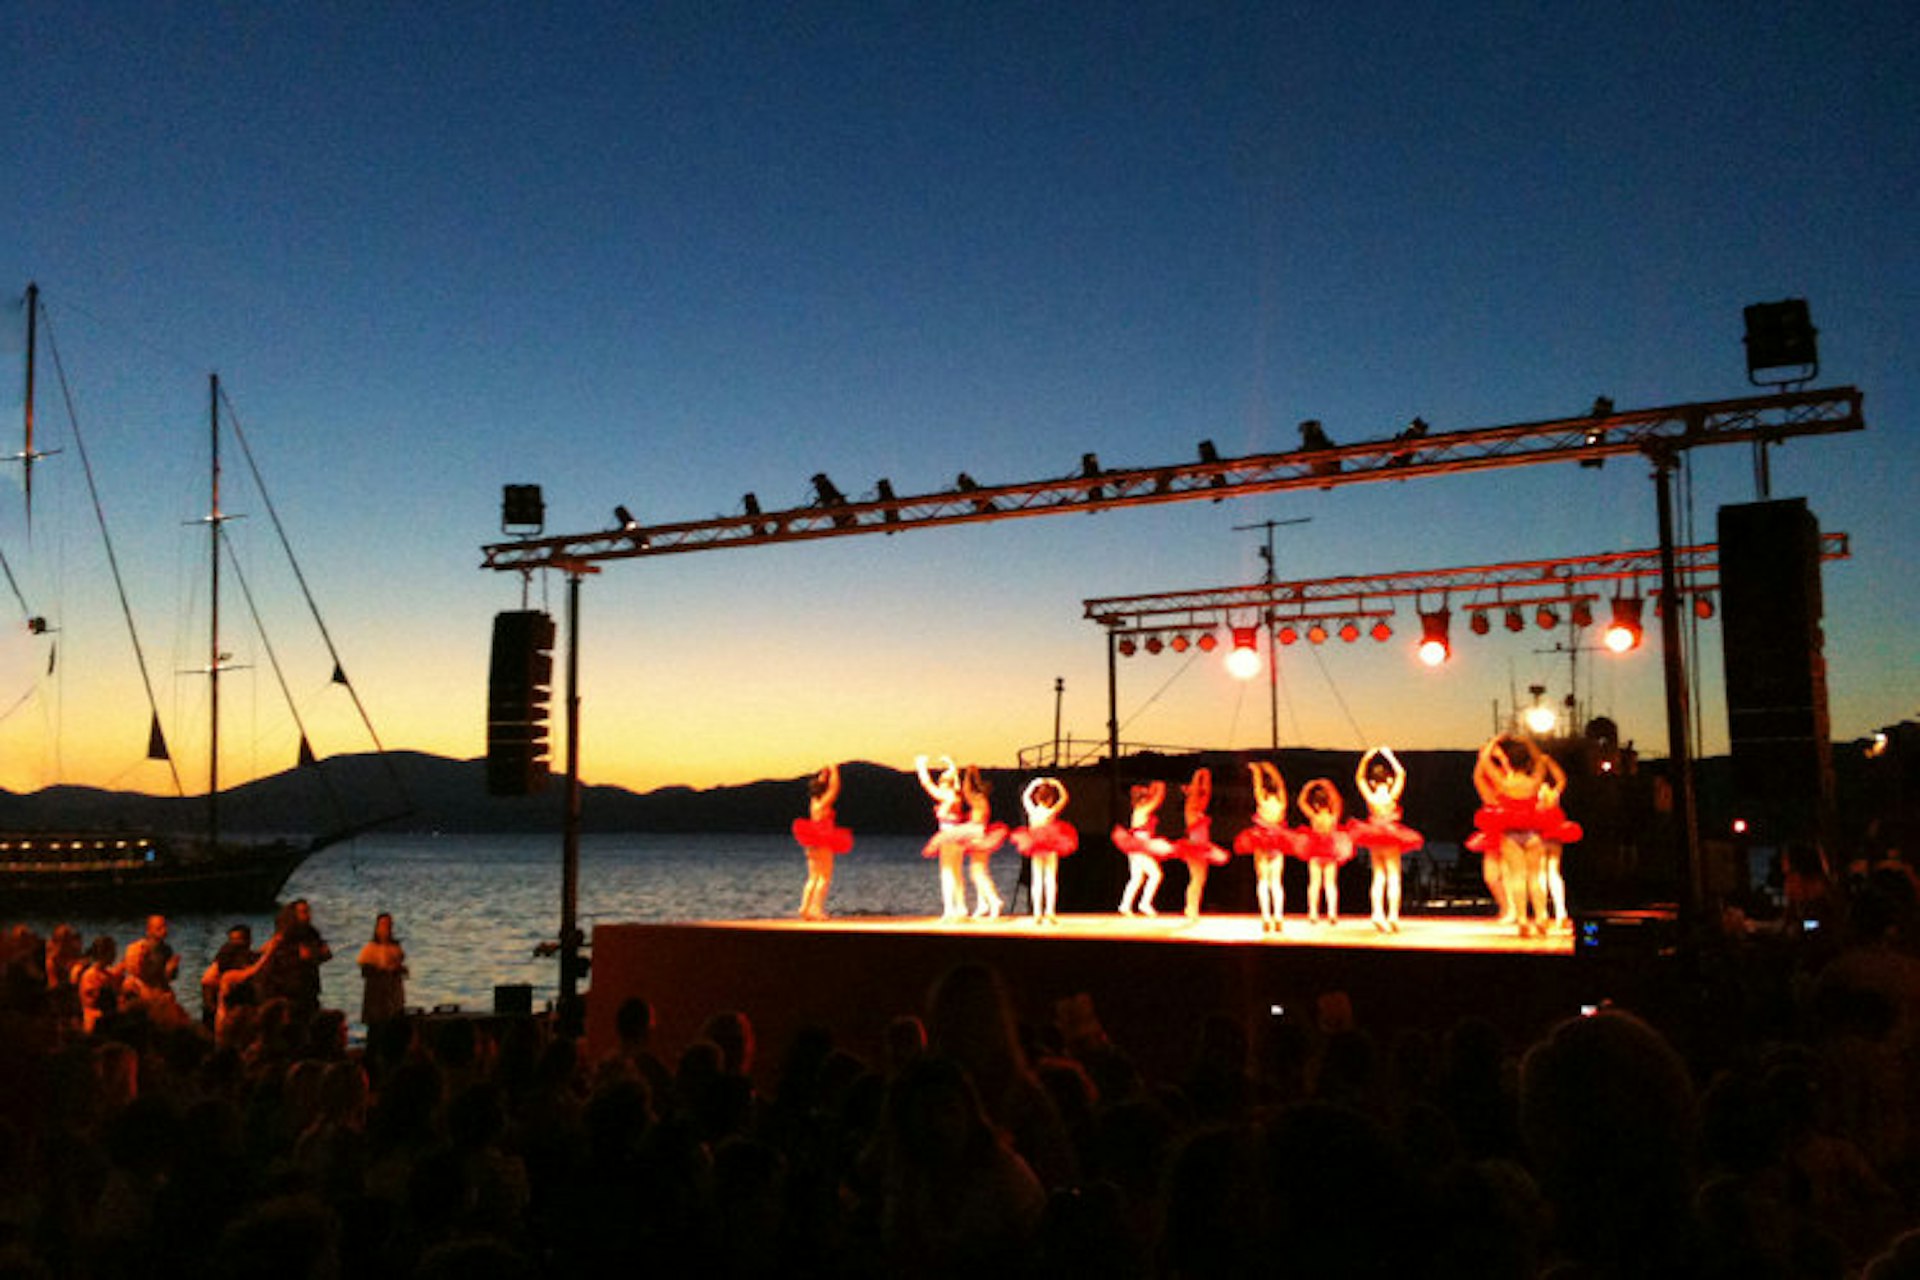 The town turns out for a children’s harbourside ballet performance in Hydra. Image by Alexis Averbuck / Lonely Planet